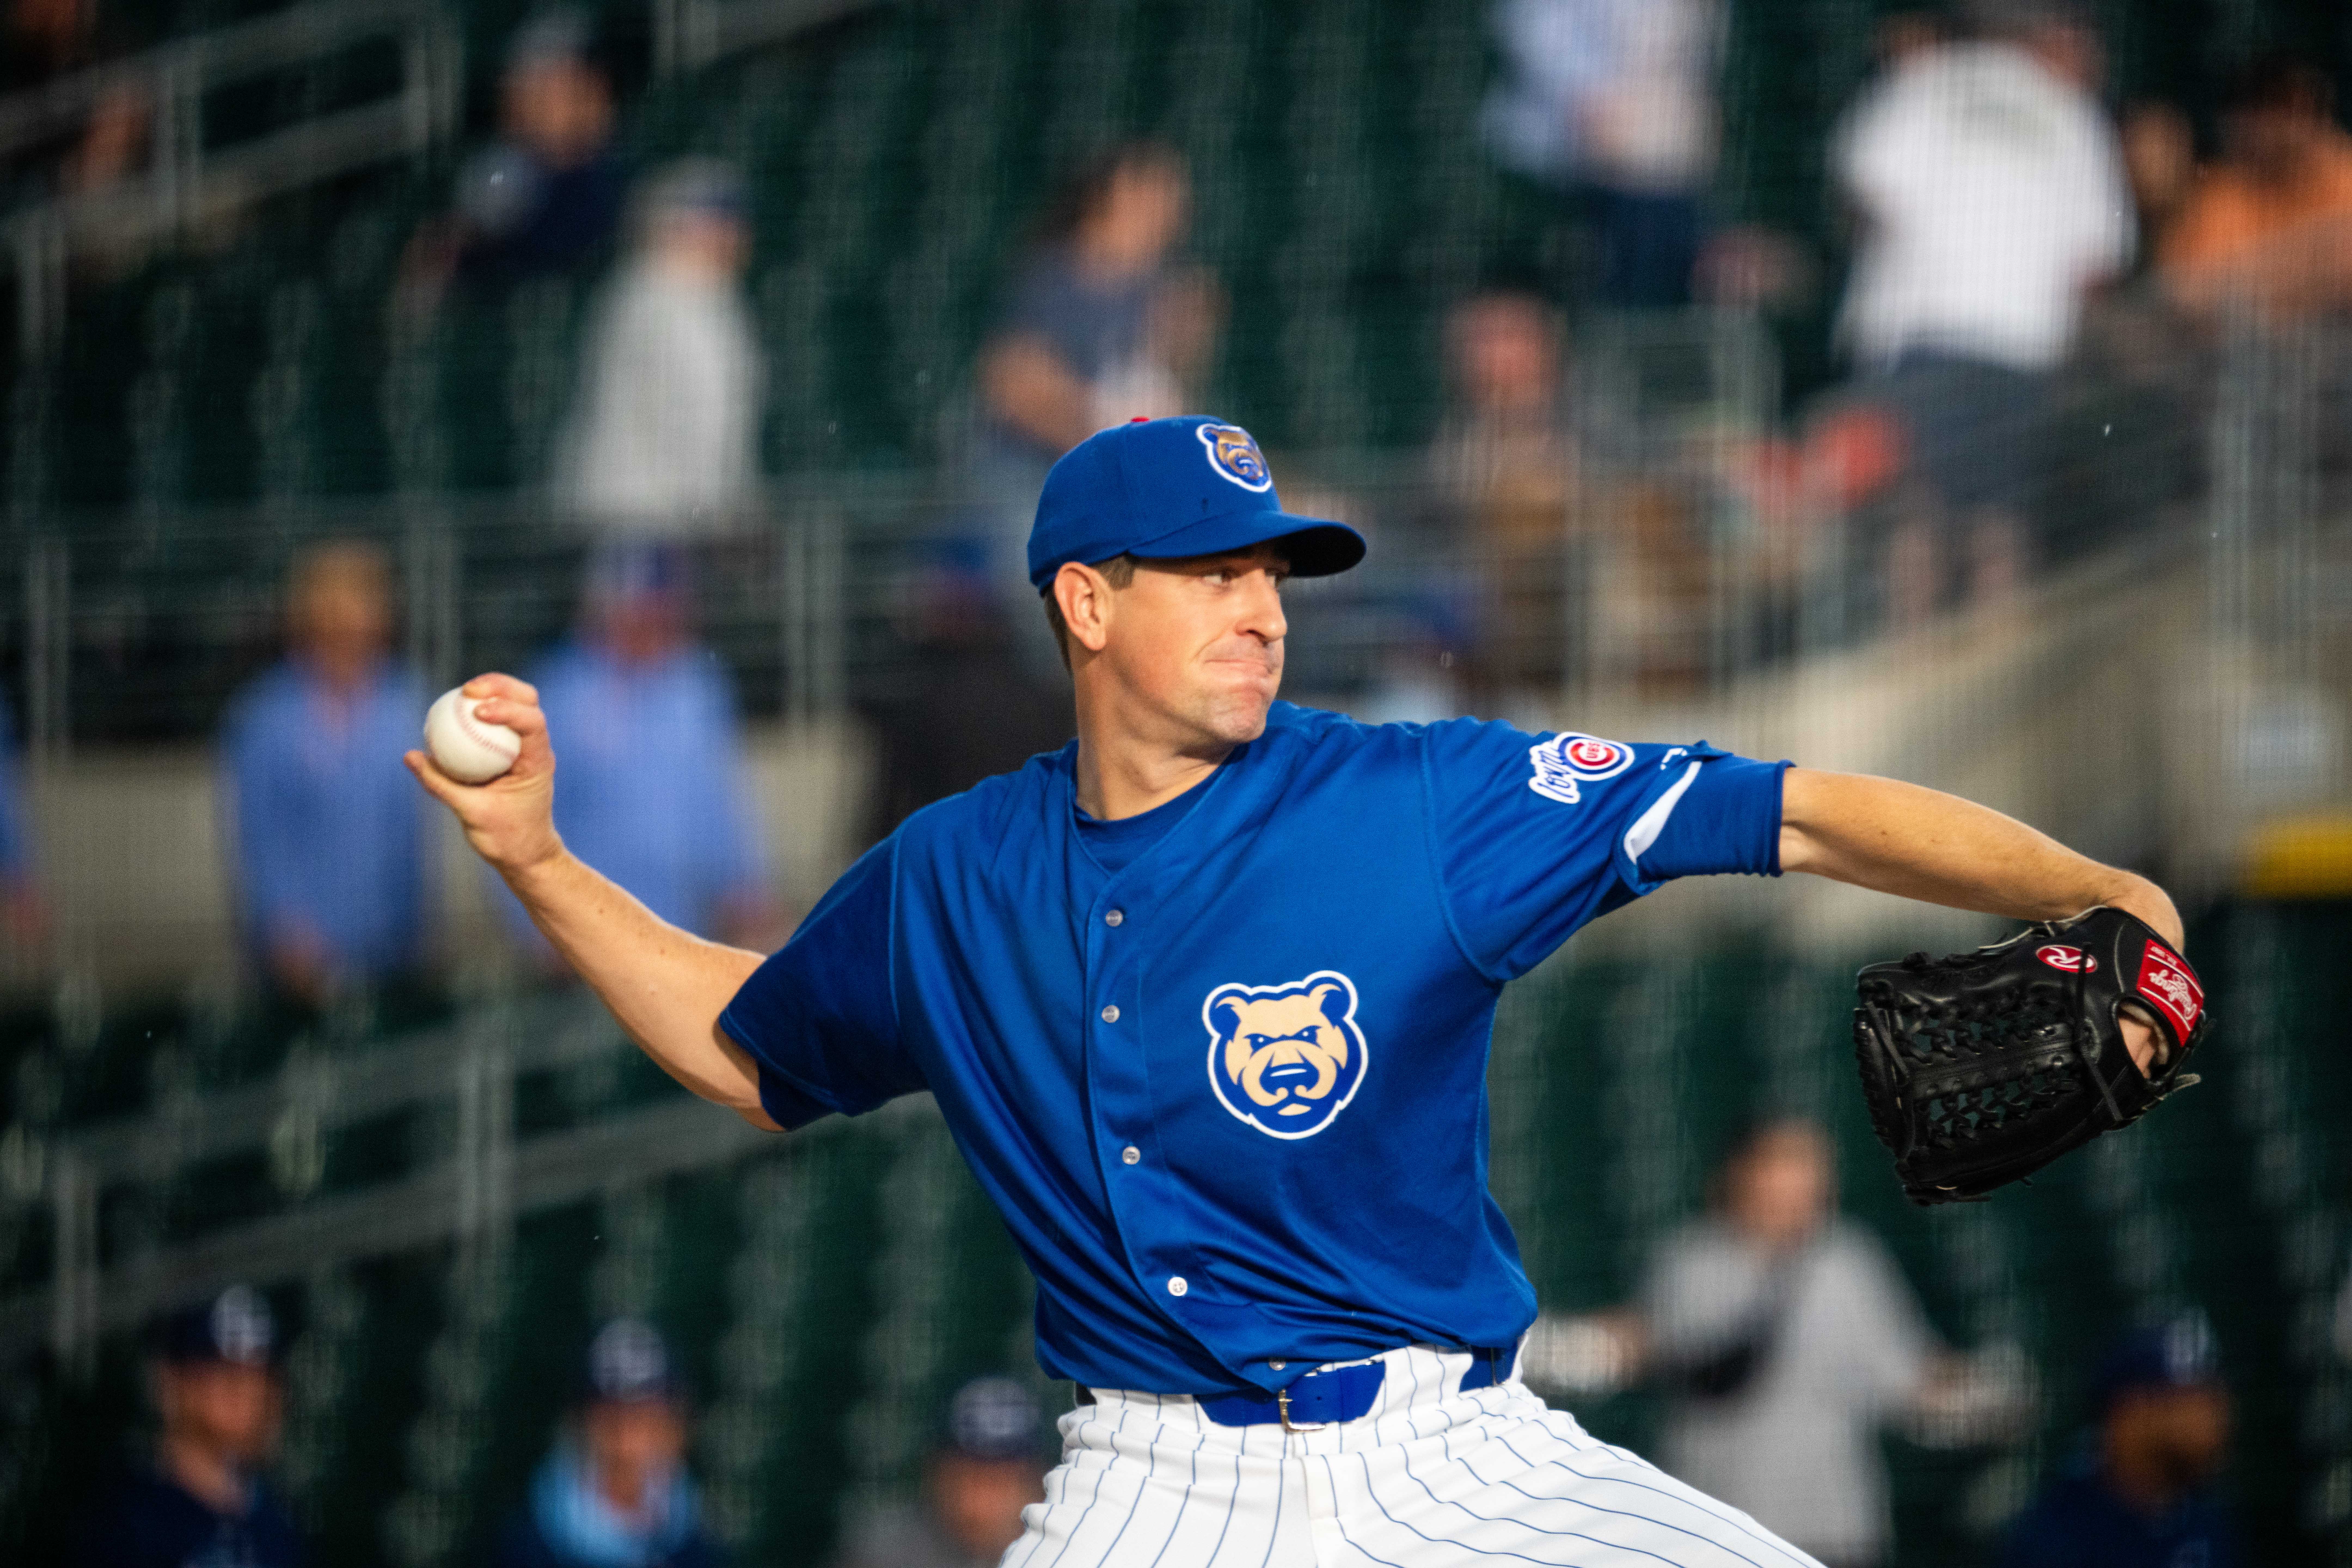 Chicago Cubs pitcher Kyle Hendricks looks solid in rehab start with the Iowa Cubs